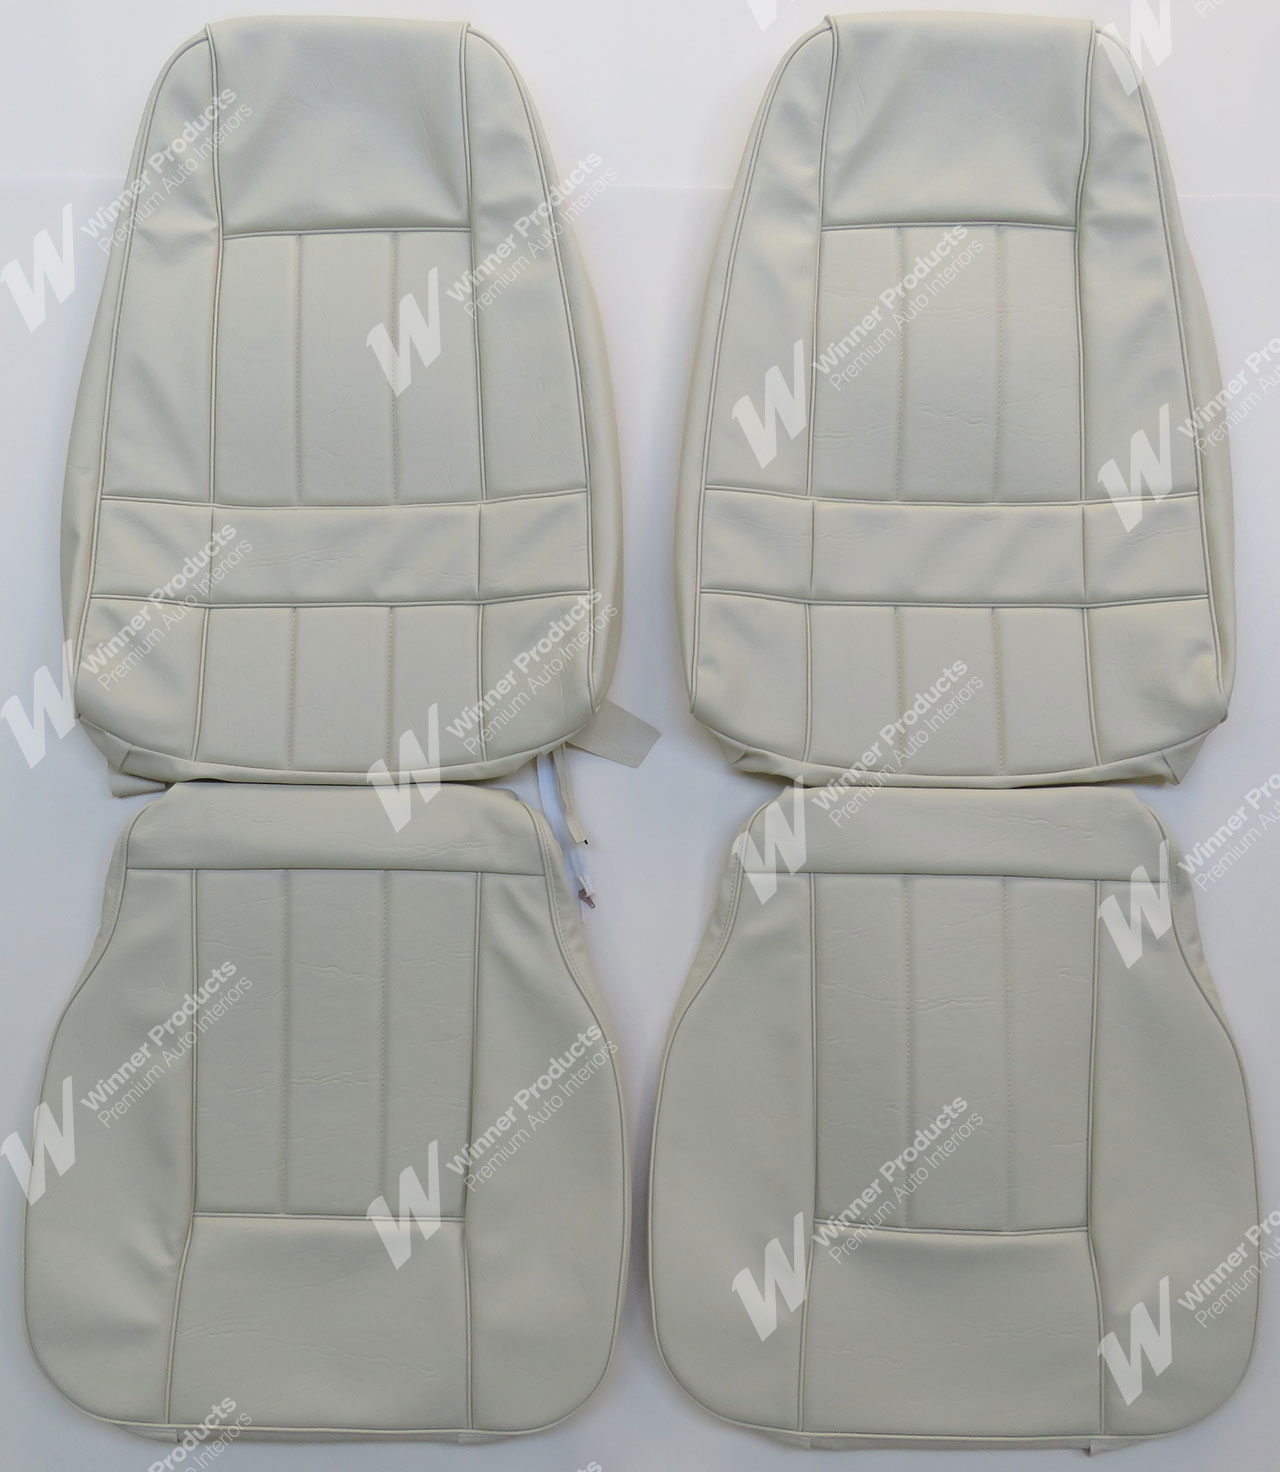 Ford GT XA GT Coupe W White Seat Covers (Image 1 of 4)